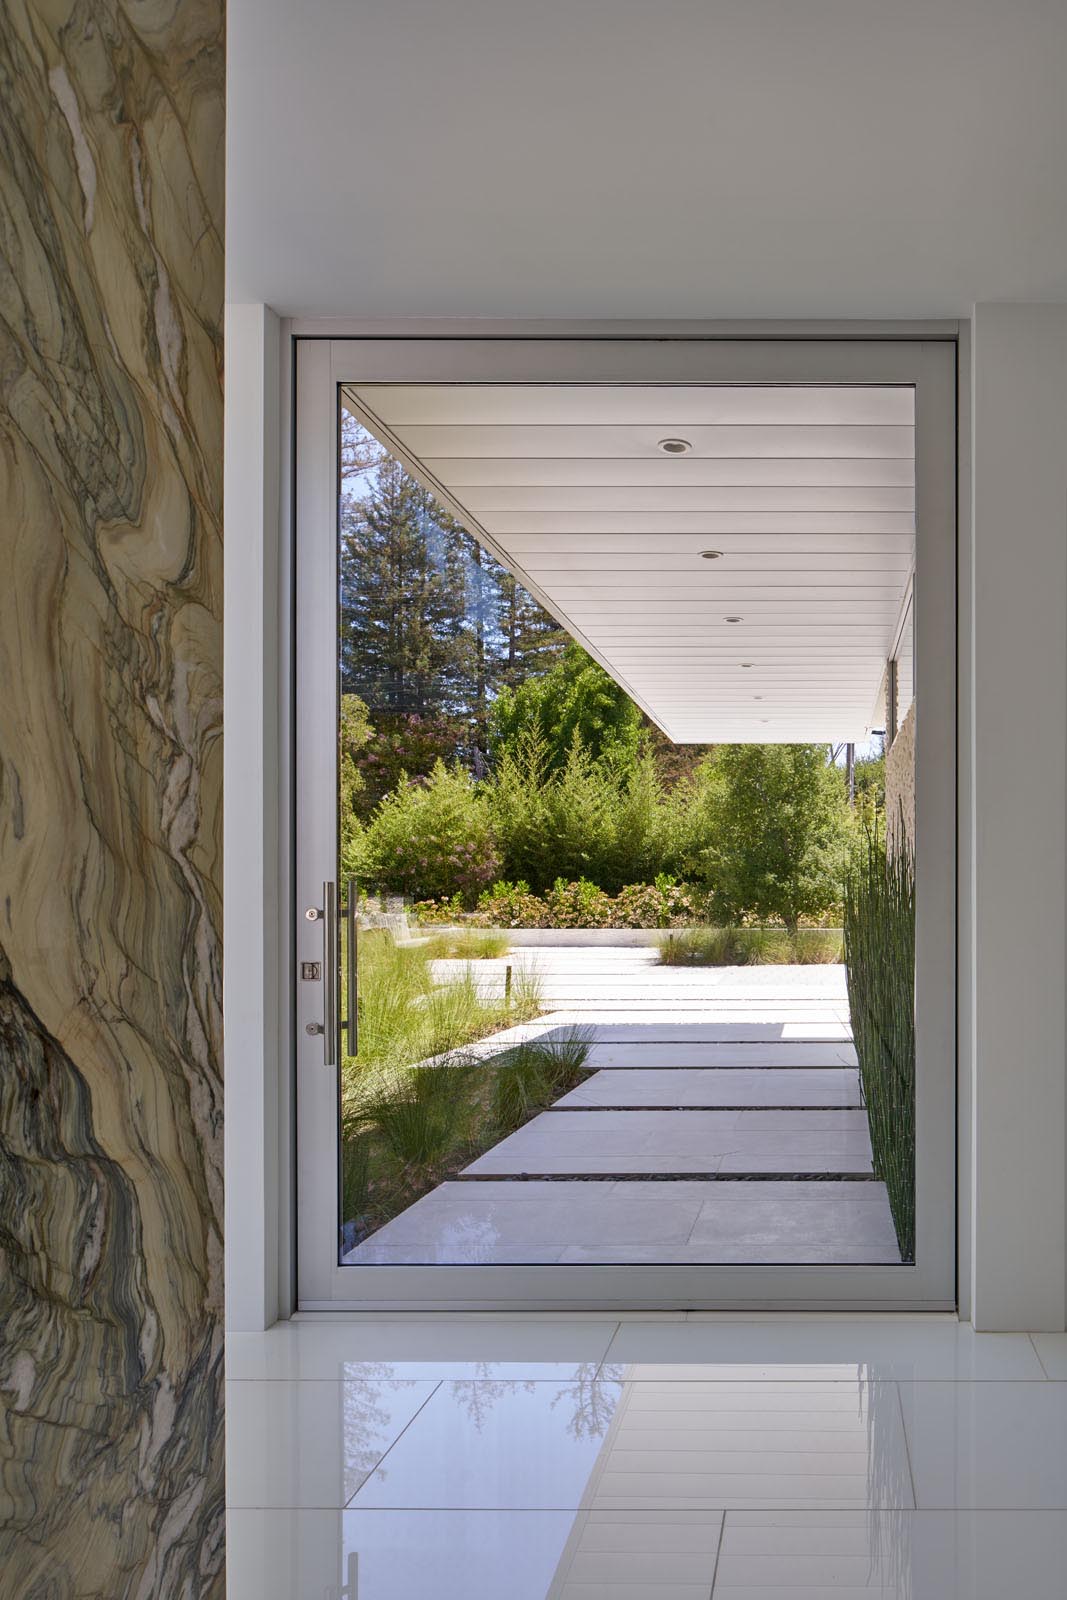 A covered walkway connects to the pivoting glass front door and the entryway.